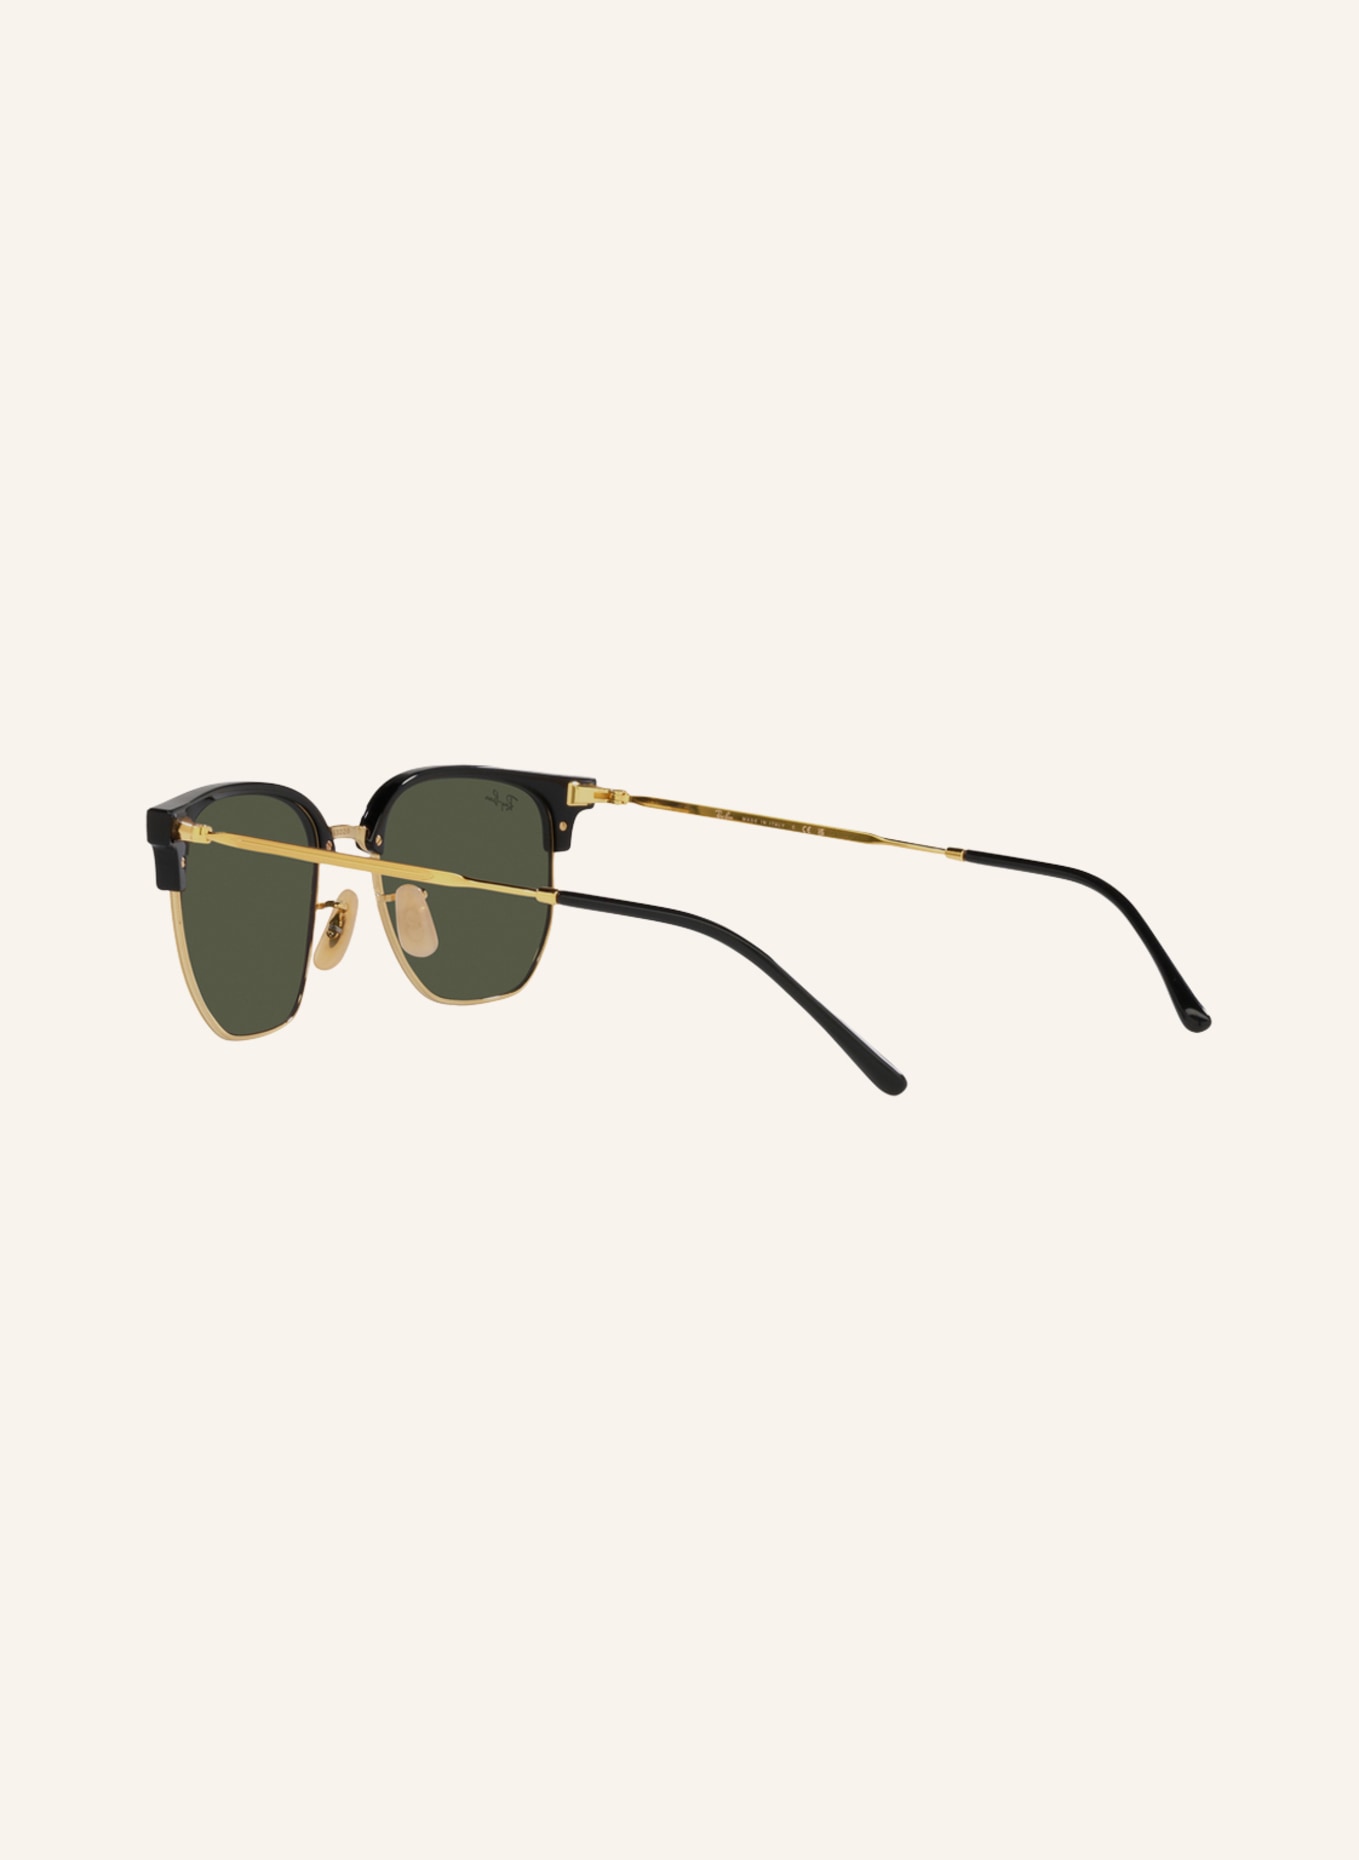 Ray-Ban Sunglasses RB4416, Color: 601/31 - GOLD/ BLACK/ GREEN (Image 4)